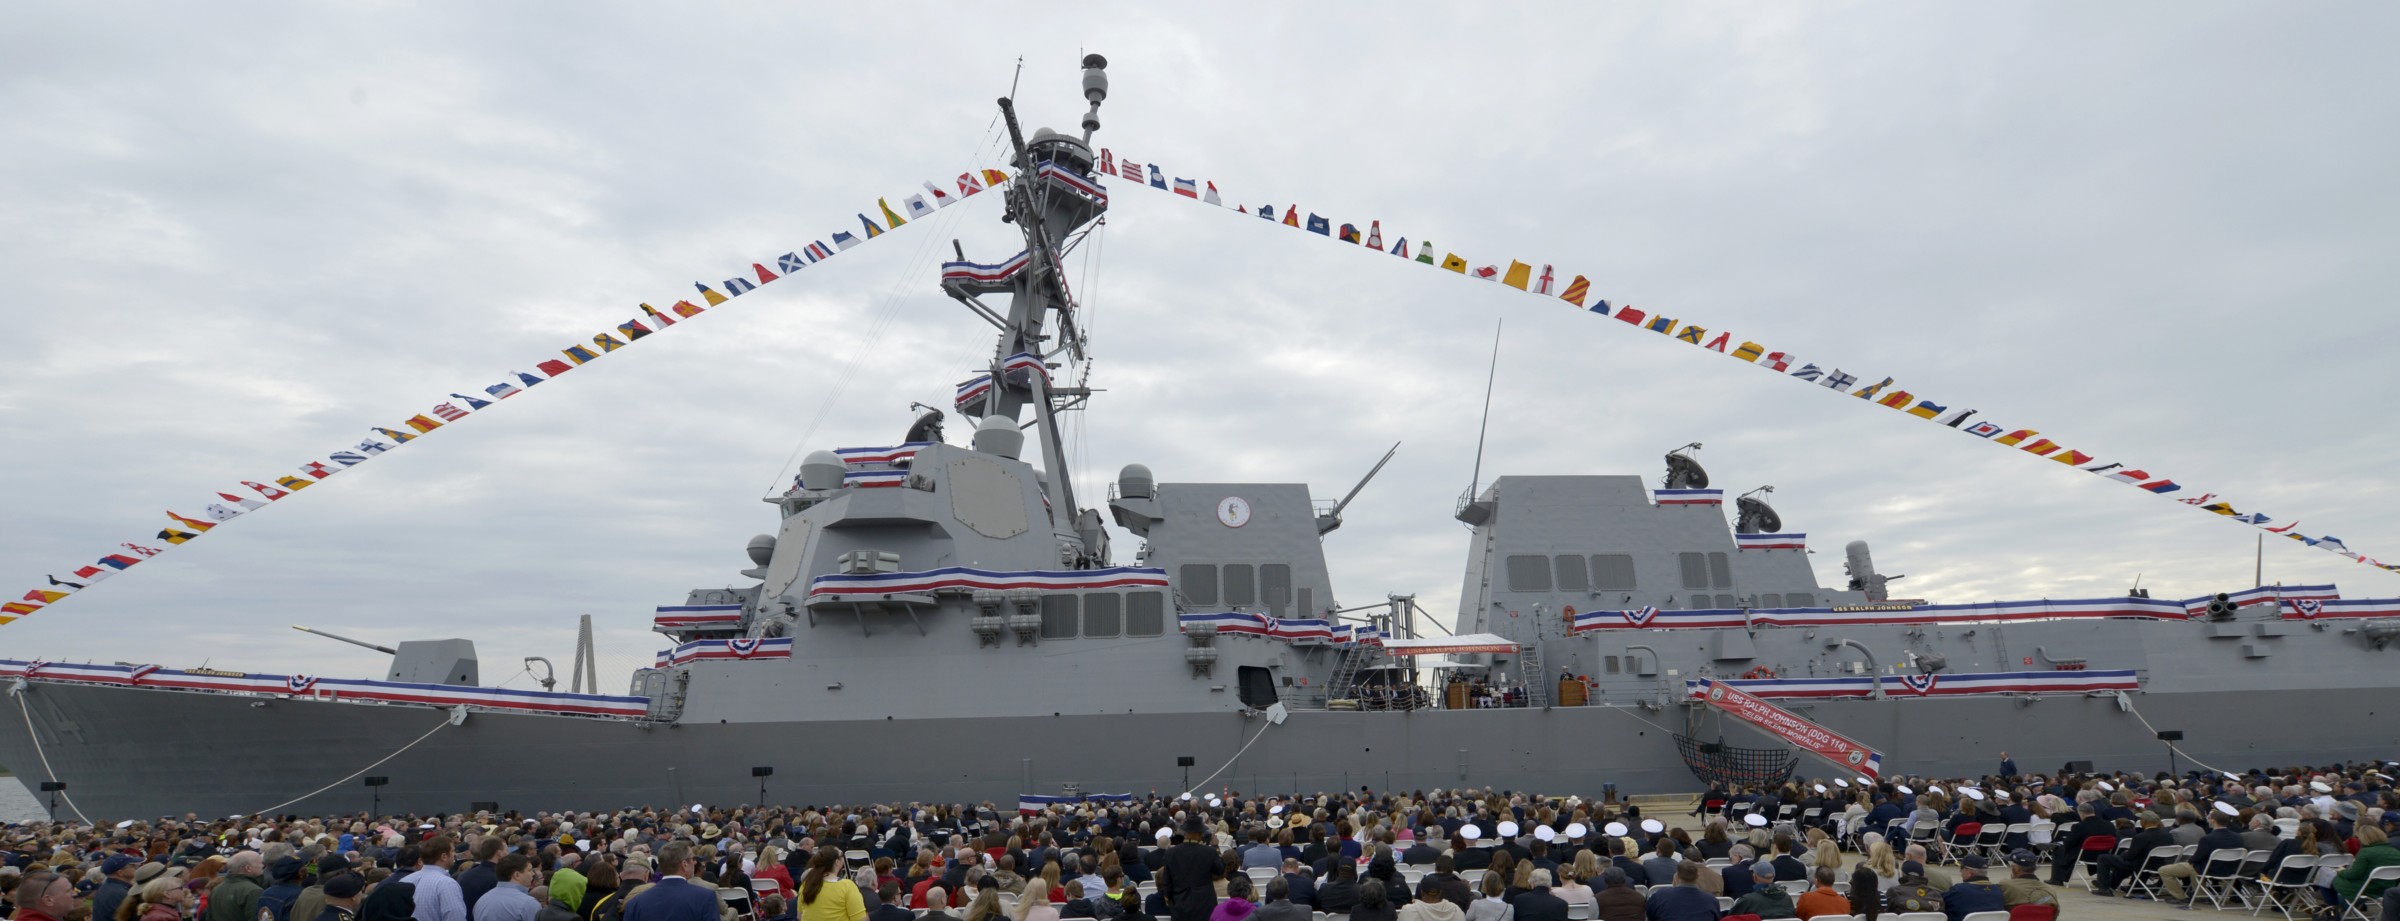 ddg-114 uss ralph johnson arleigh burke class guided missile destroyer us navy aegis 05 commissioning